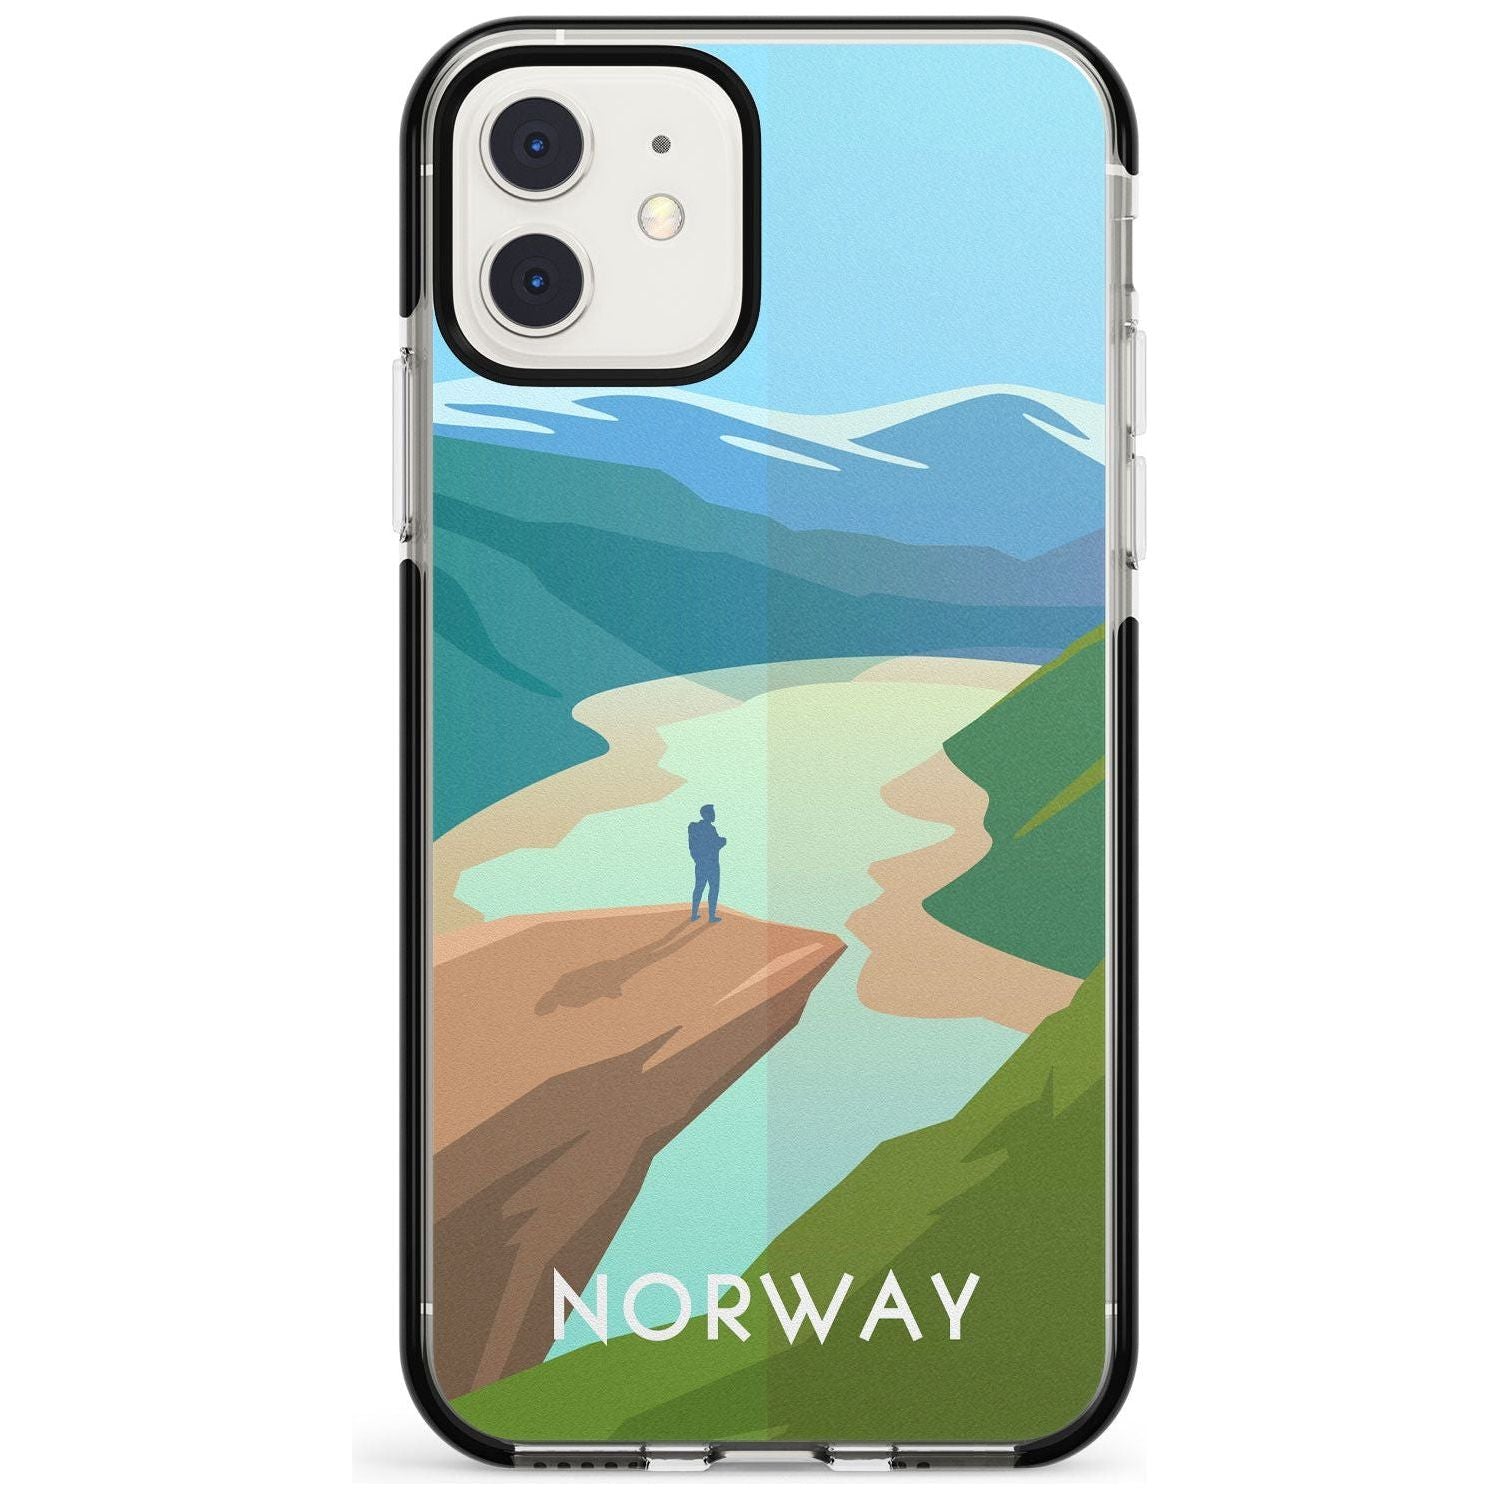 Vintage Travel Poster Norway Black Impact Phone Case for iPhone 11